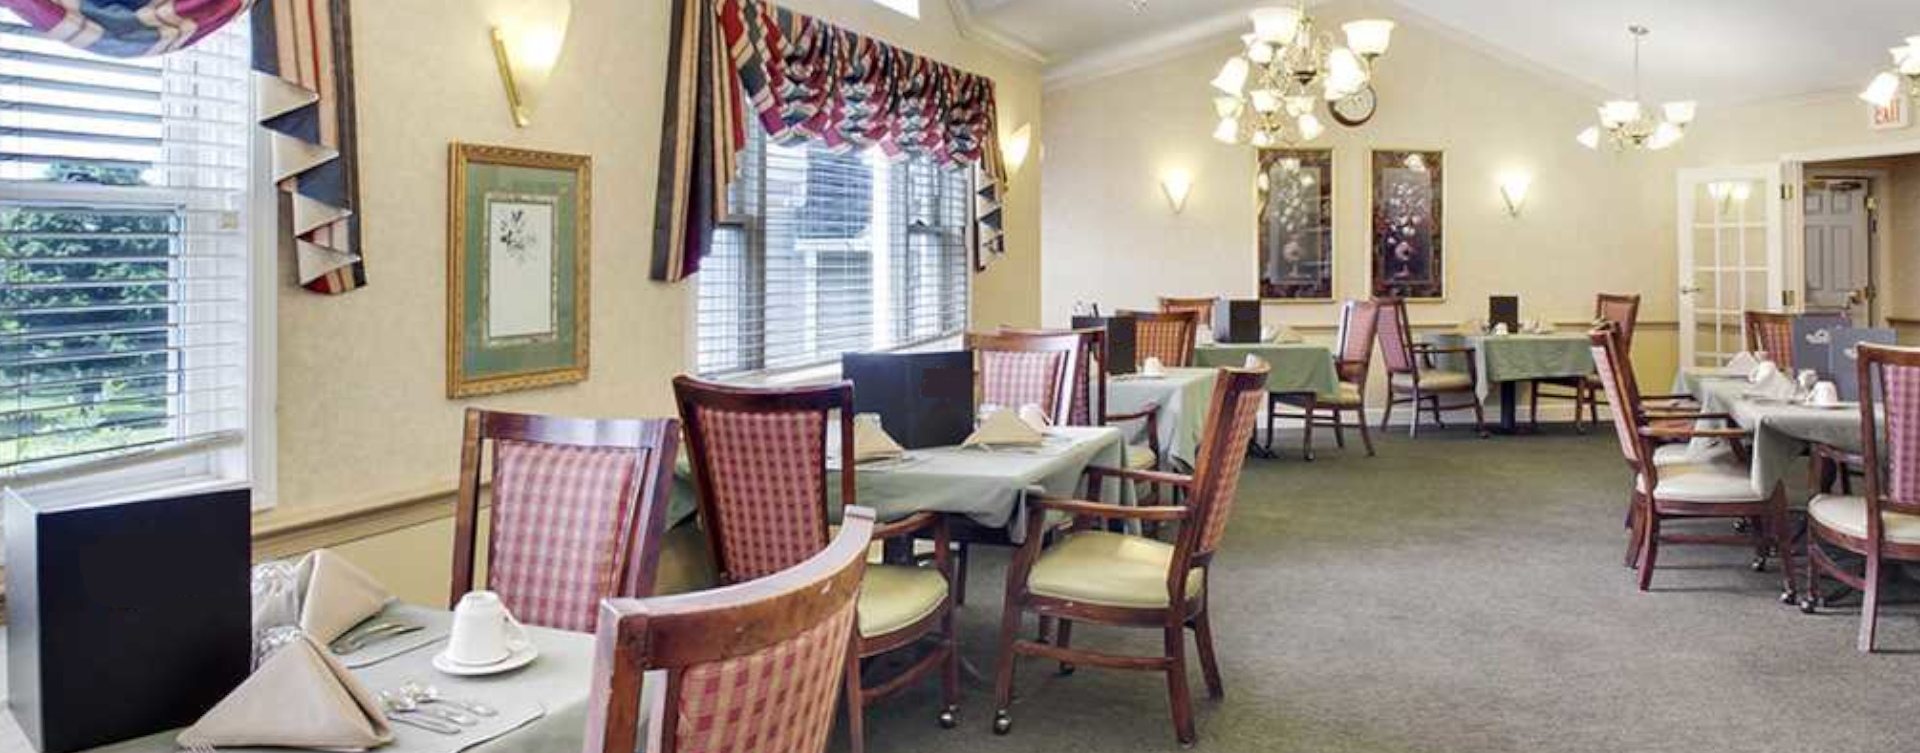 Food is best when shared with friends in the dining room at Bickford of Upper Arlington